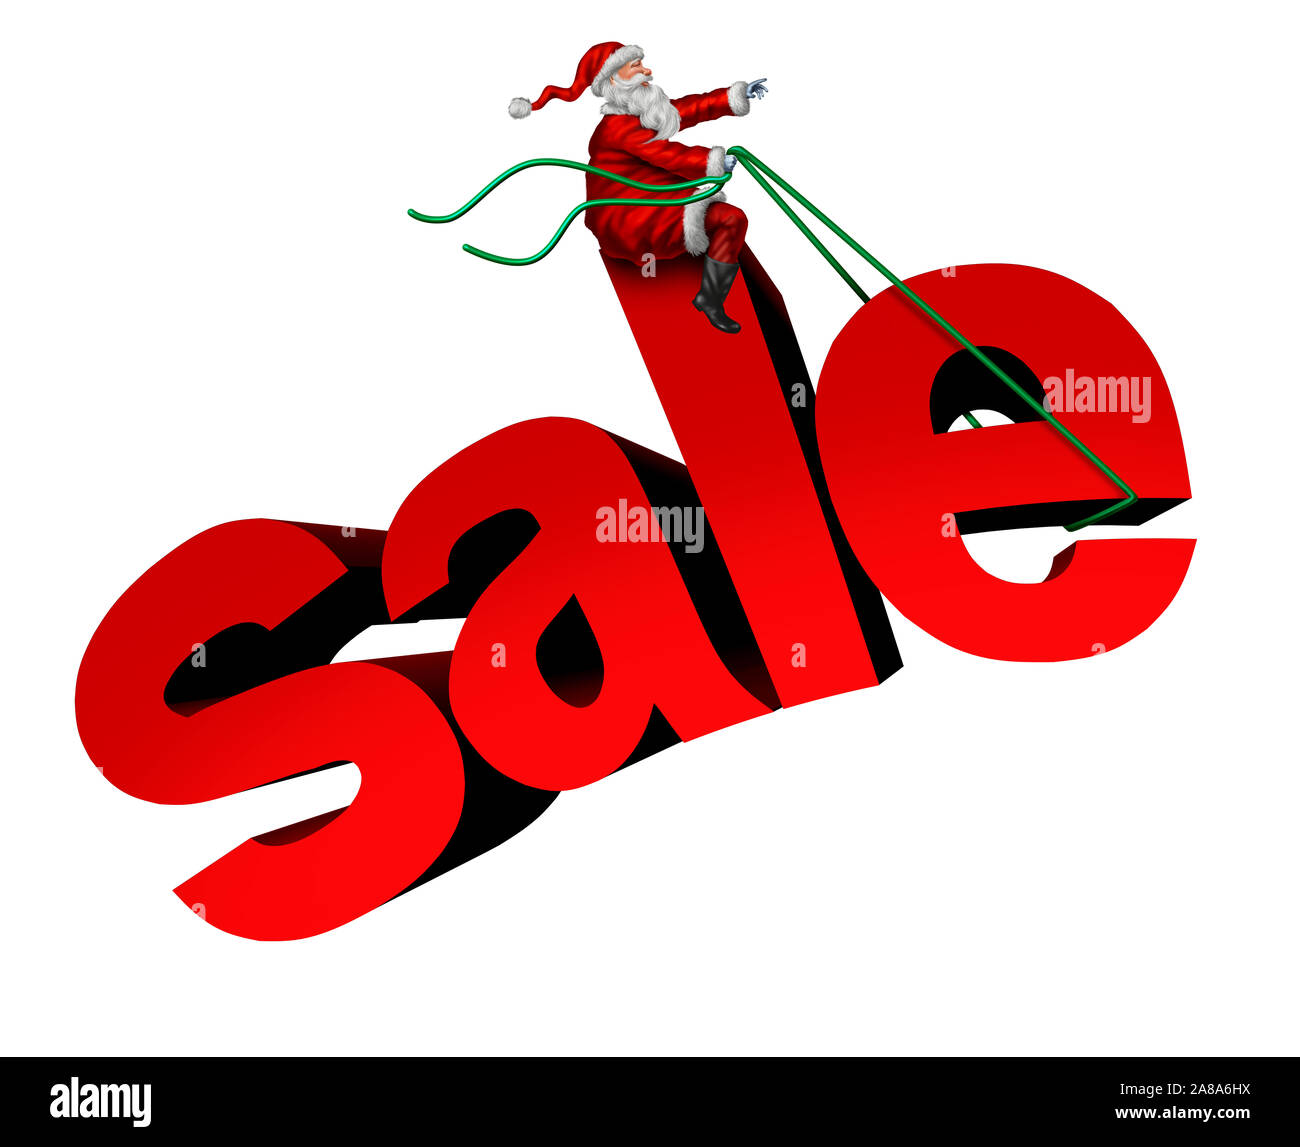 Christmas holiday sale text as a Santa Clause riding a flying giant shopping icon as a joyful happy winter consumer promotion celebration. Stock Photo